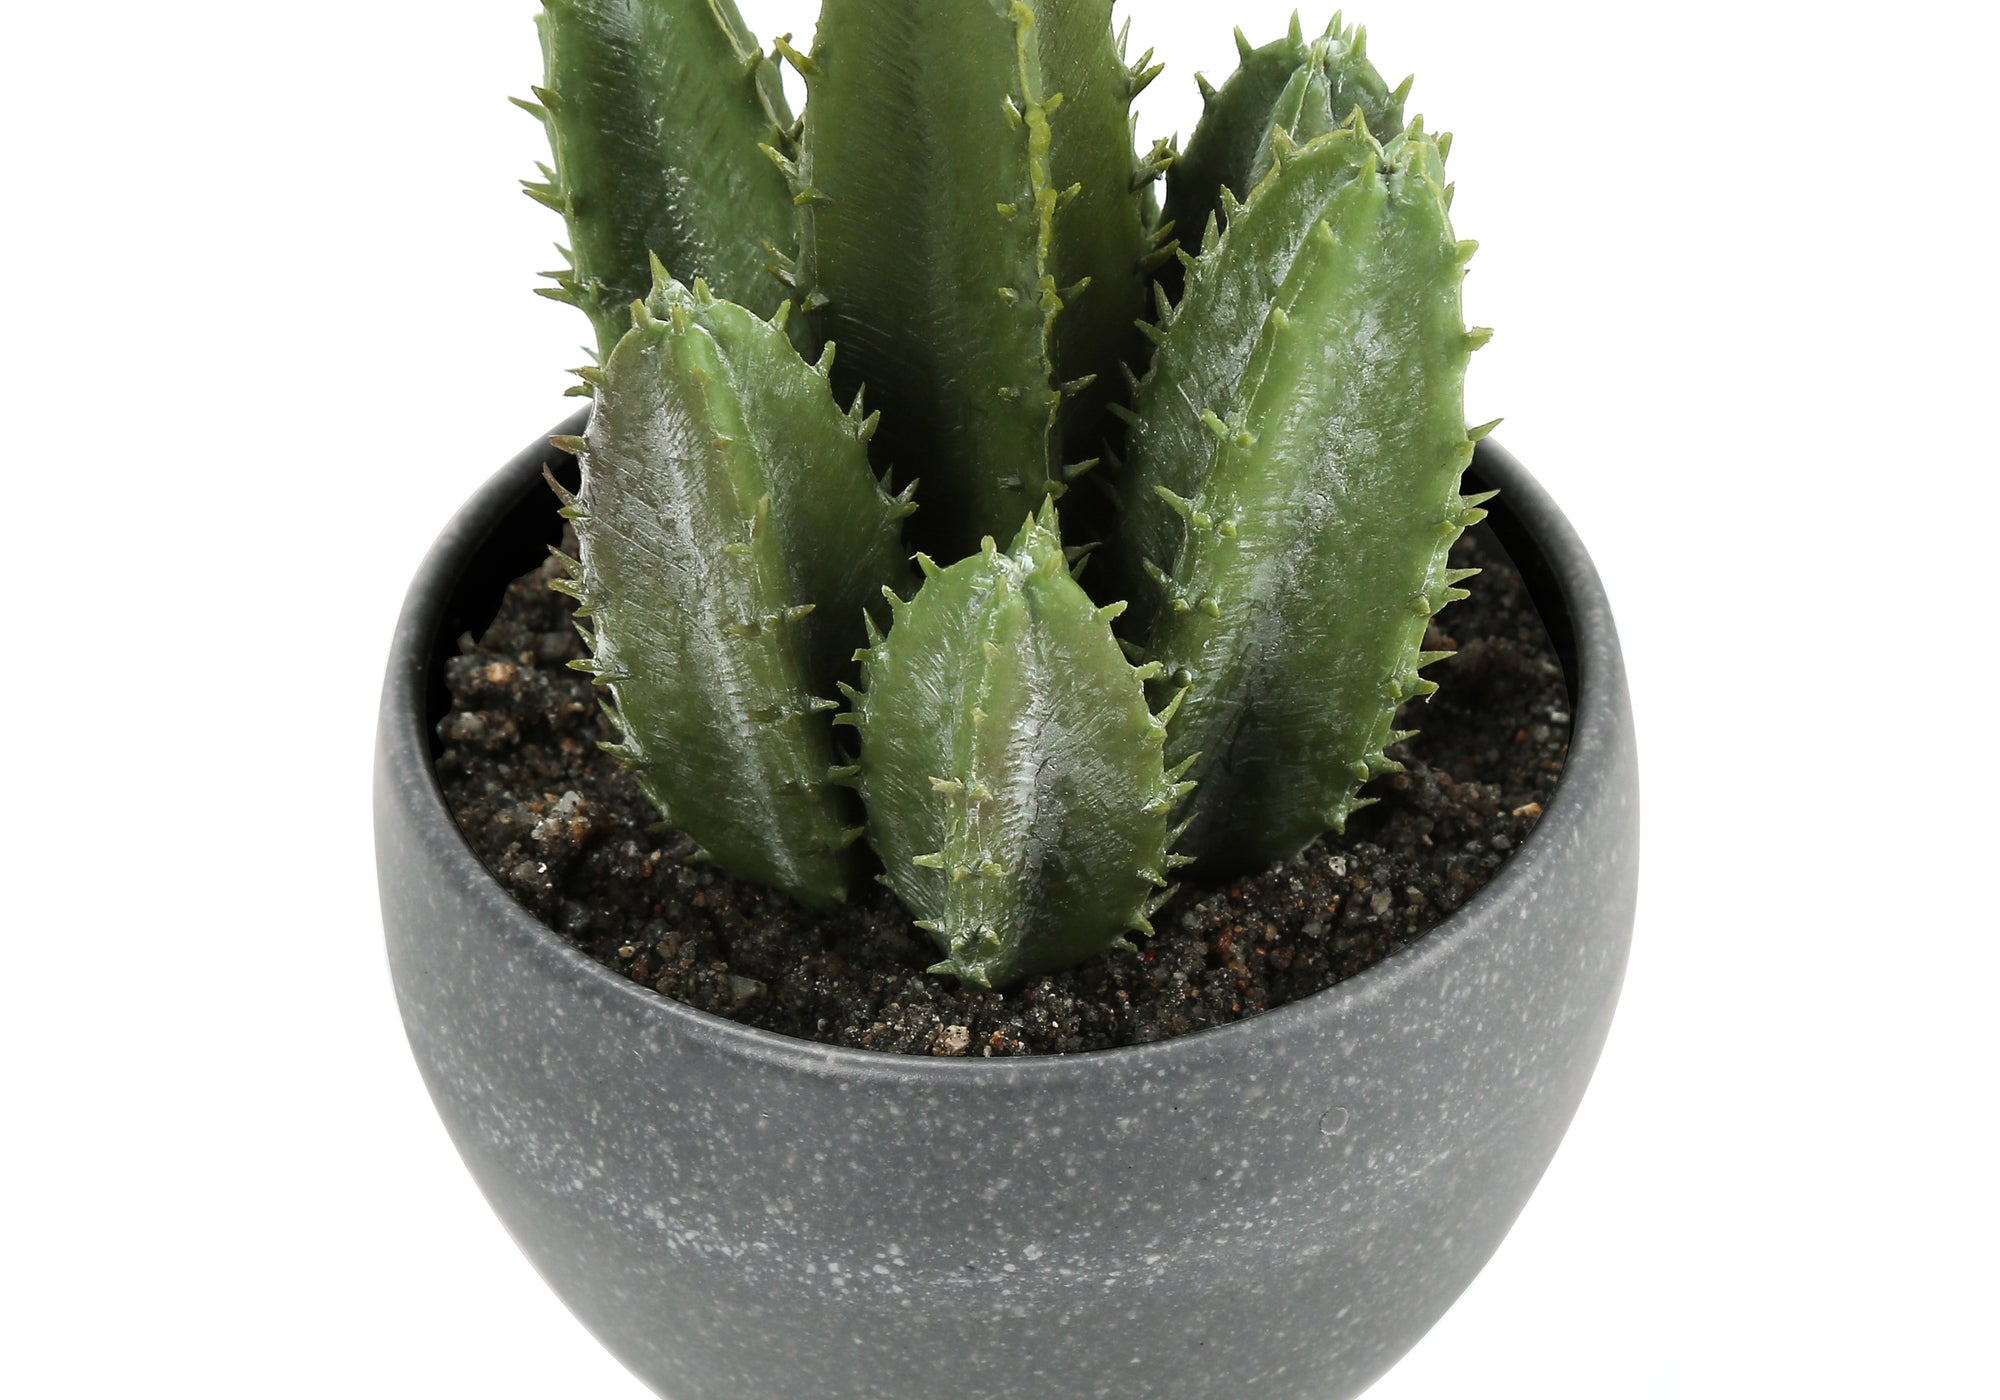 MN-779587    Artificial Plant, 6" Tall, Succulent, Indoor, Faux, Fake, Table, Greenery, Potted, Set Of 3, Decorative, Green Plants, Grey Cement Pots